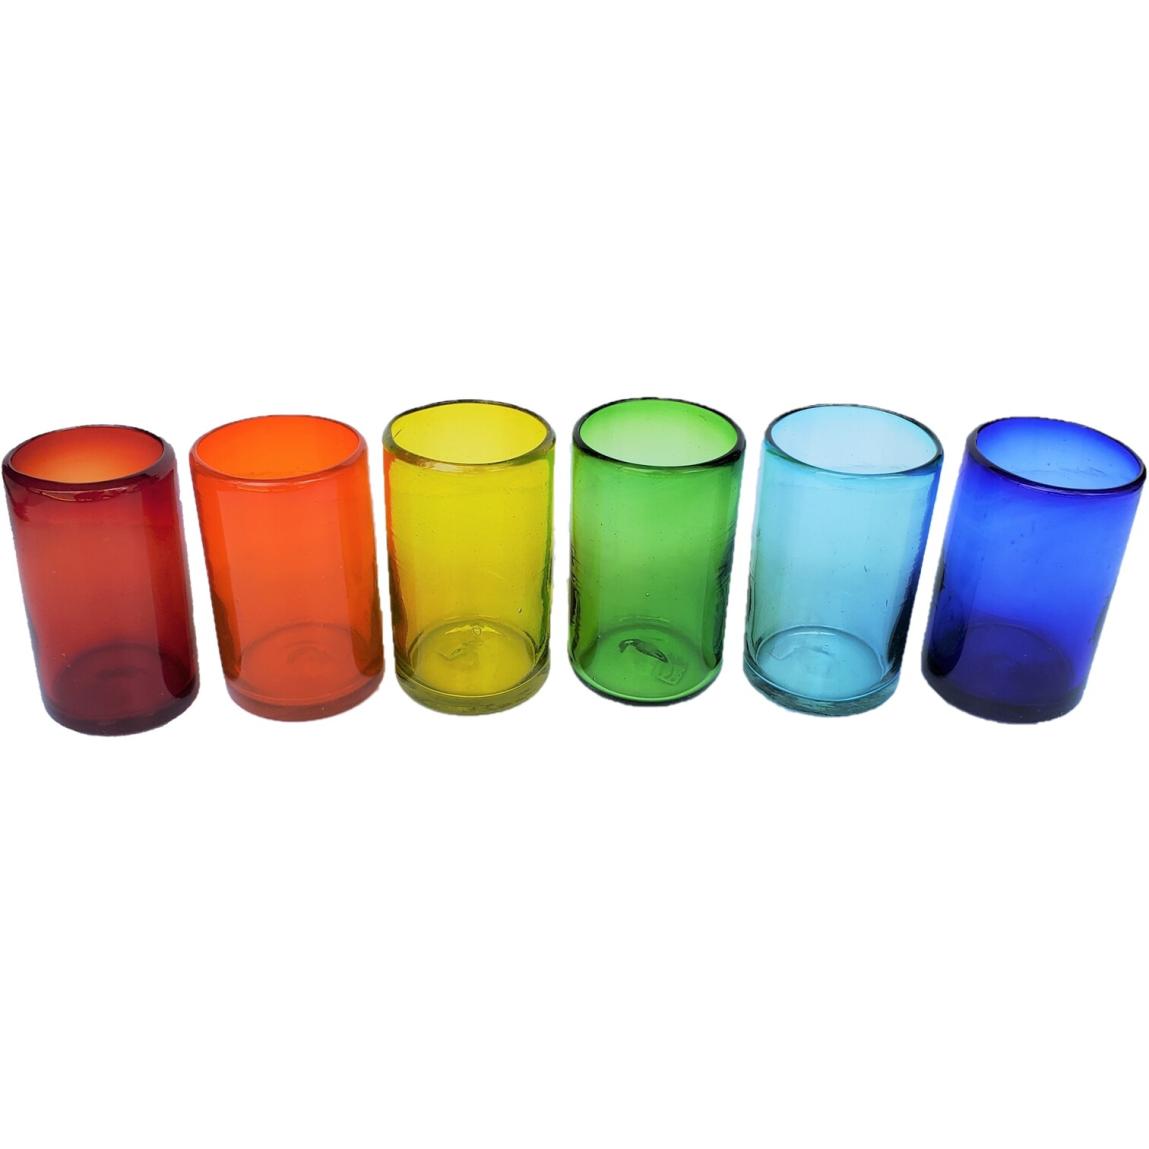 Colored Glassware / Rainbow Colored 14 oz Drinking Glasses (set of 6) / These handcrafted glasses deliver a classic touch to your favorite drink.